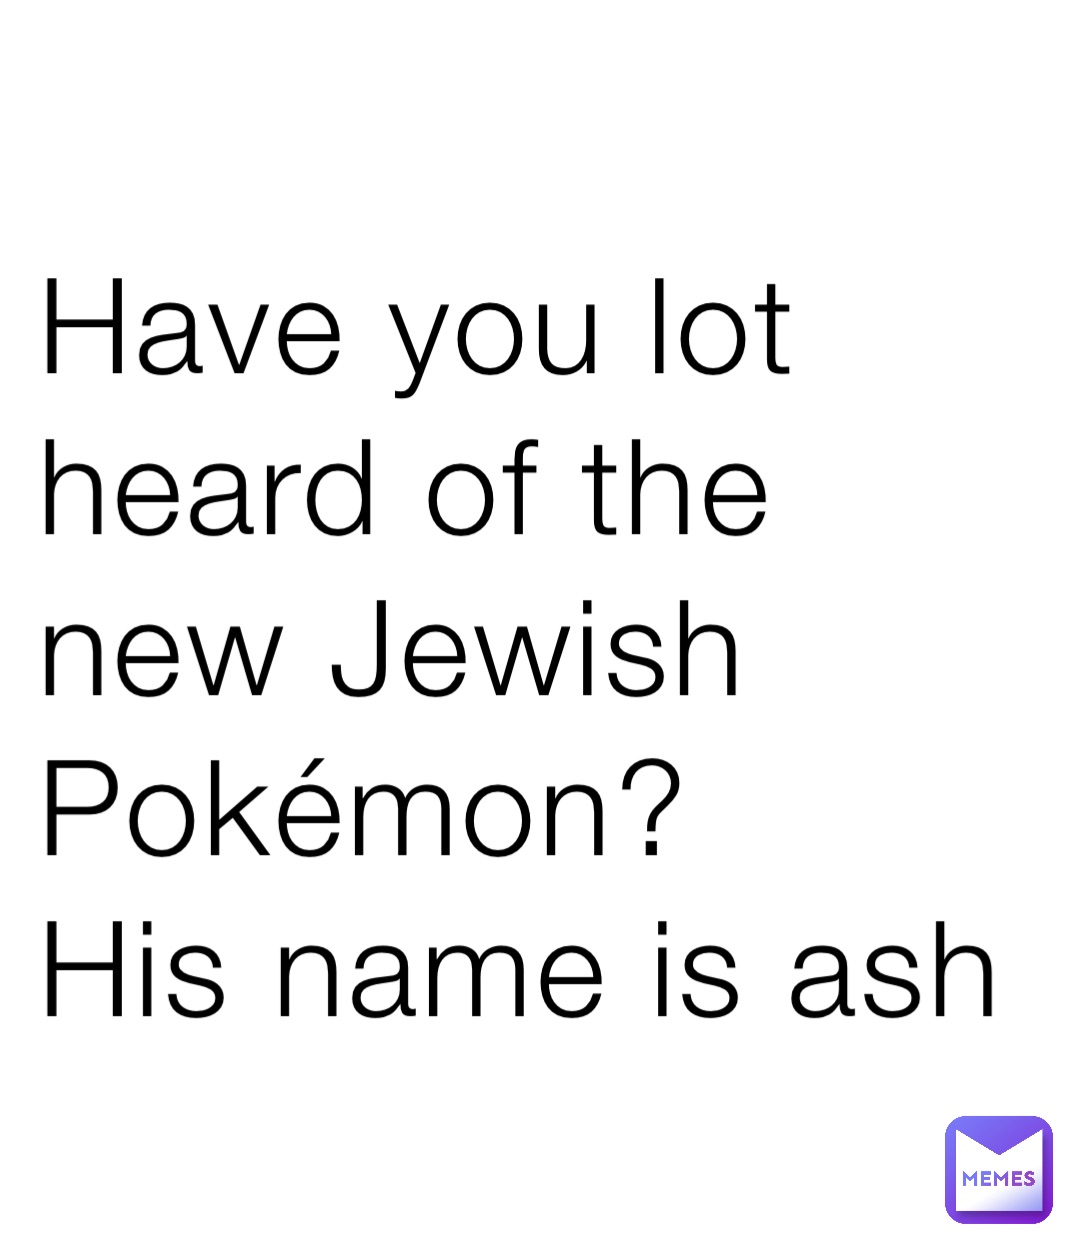 Have you lot heard of the new Jewish Pokémon?
His name is ash